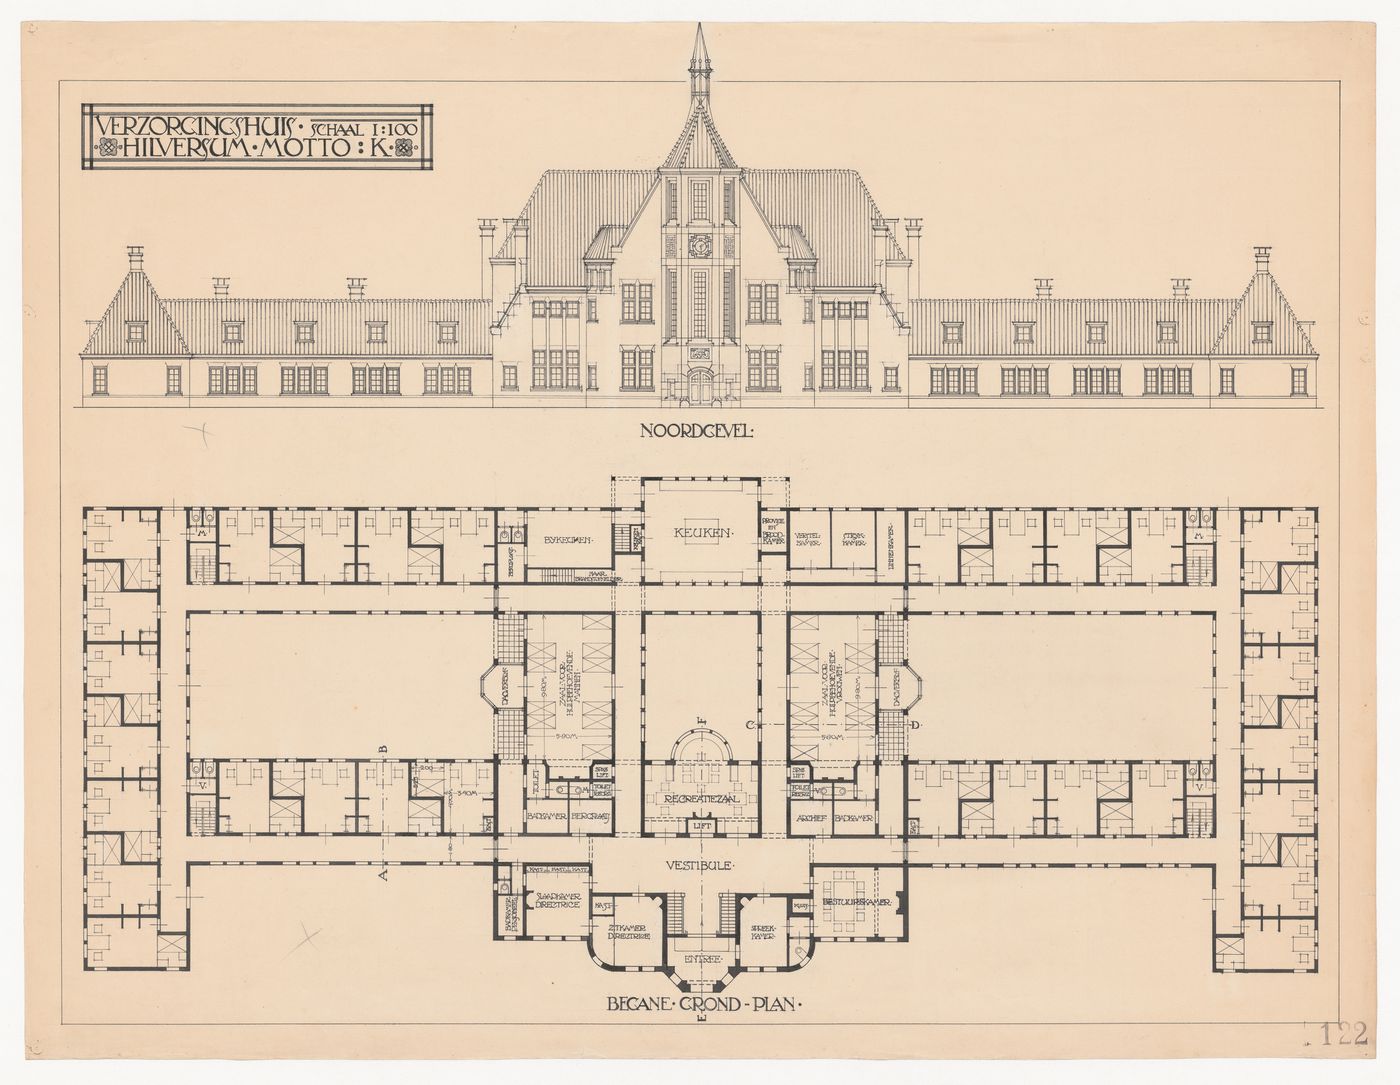 Competition drawing showing a north elevation and ground floor plan for a retirement home, Hilversum, Netherlands